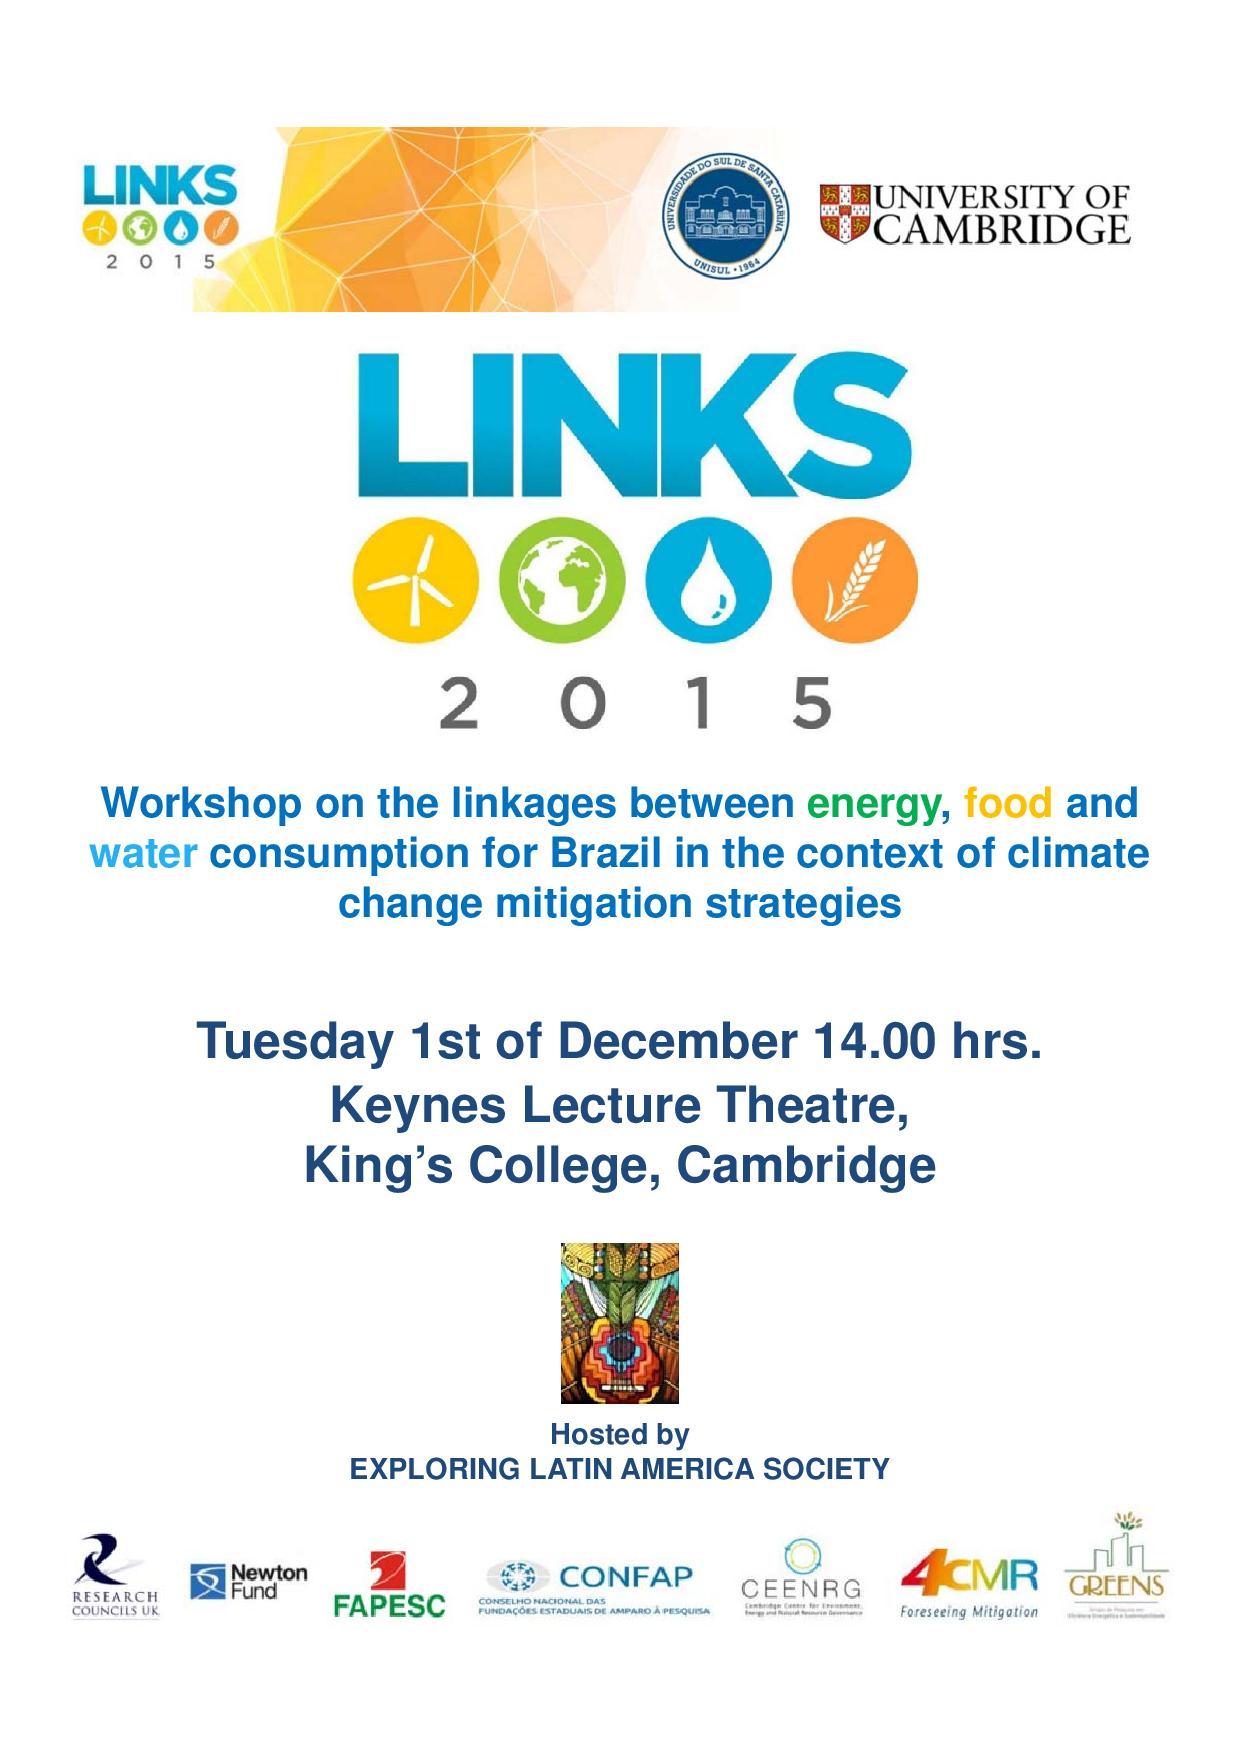 LINKS 2015: Workshop on the linkages between energy, food and water consumption for Brazil in the context of climate change mitigation strategies